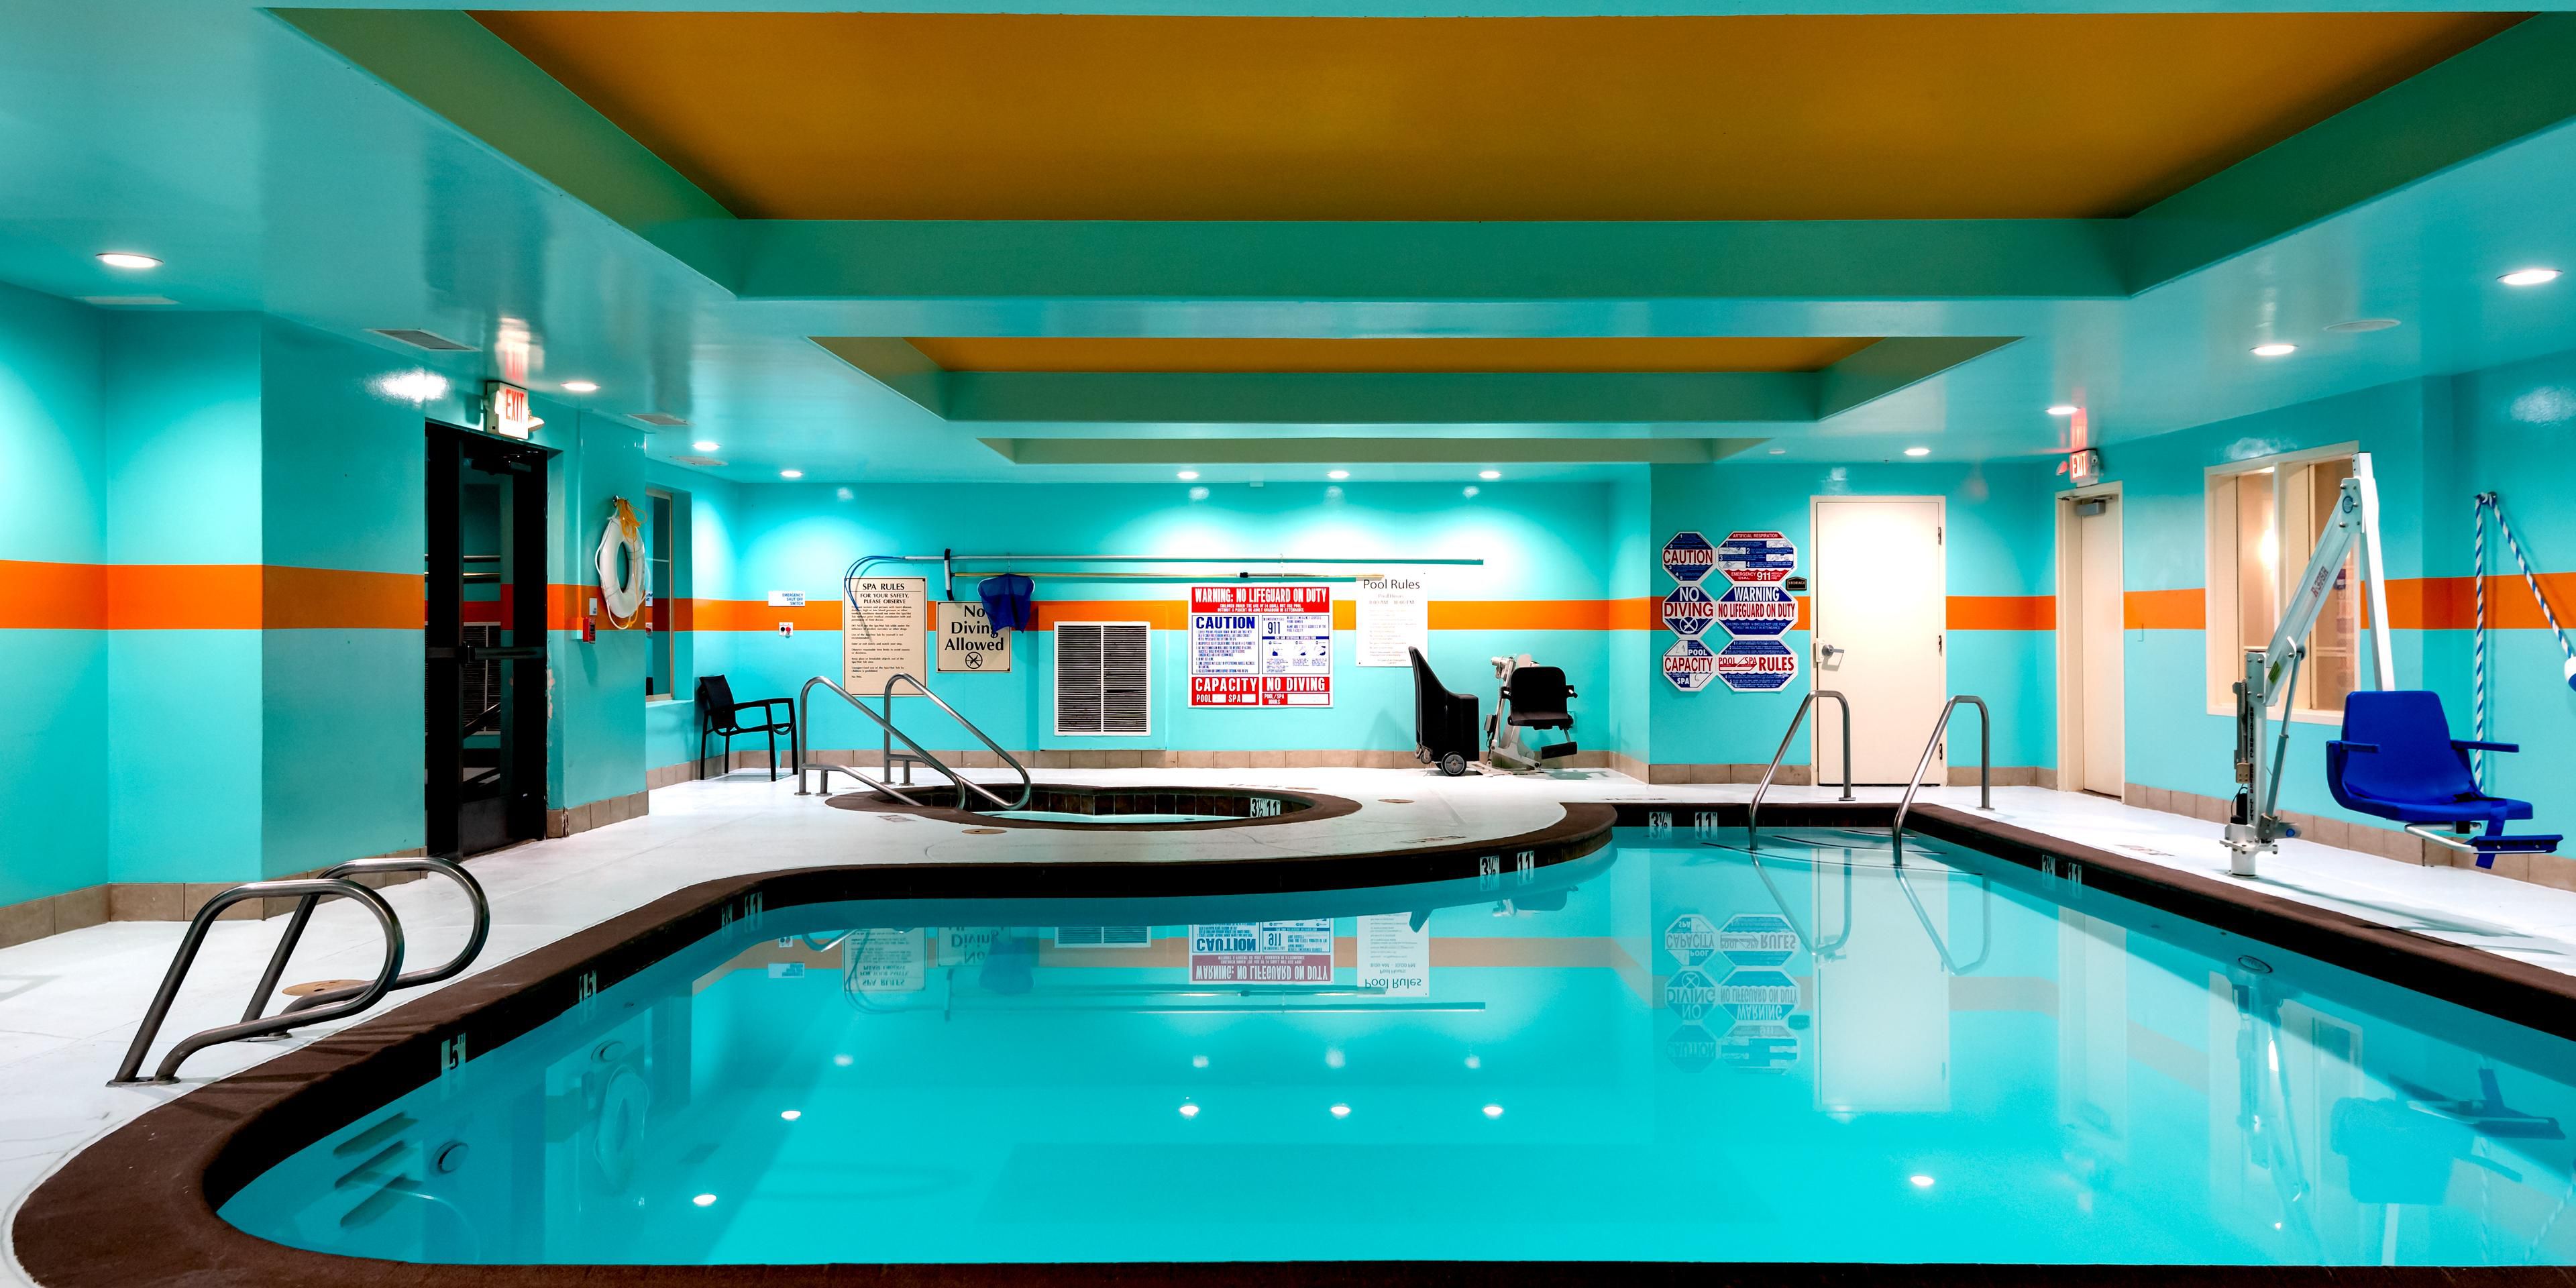 Take a dip in our indoor swimming pool, available for your enjoyment.
